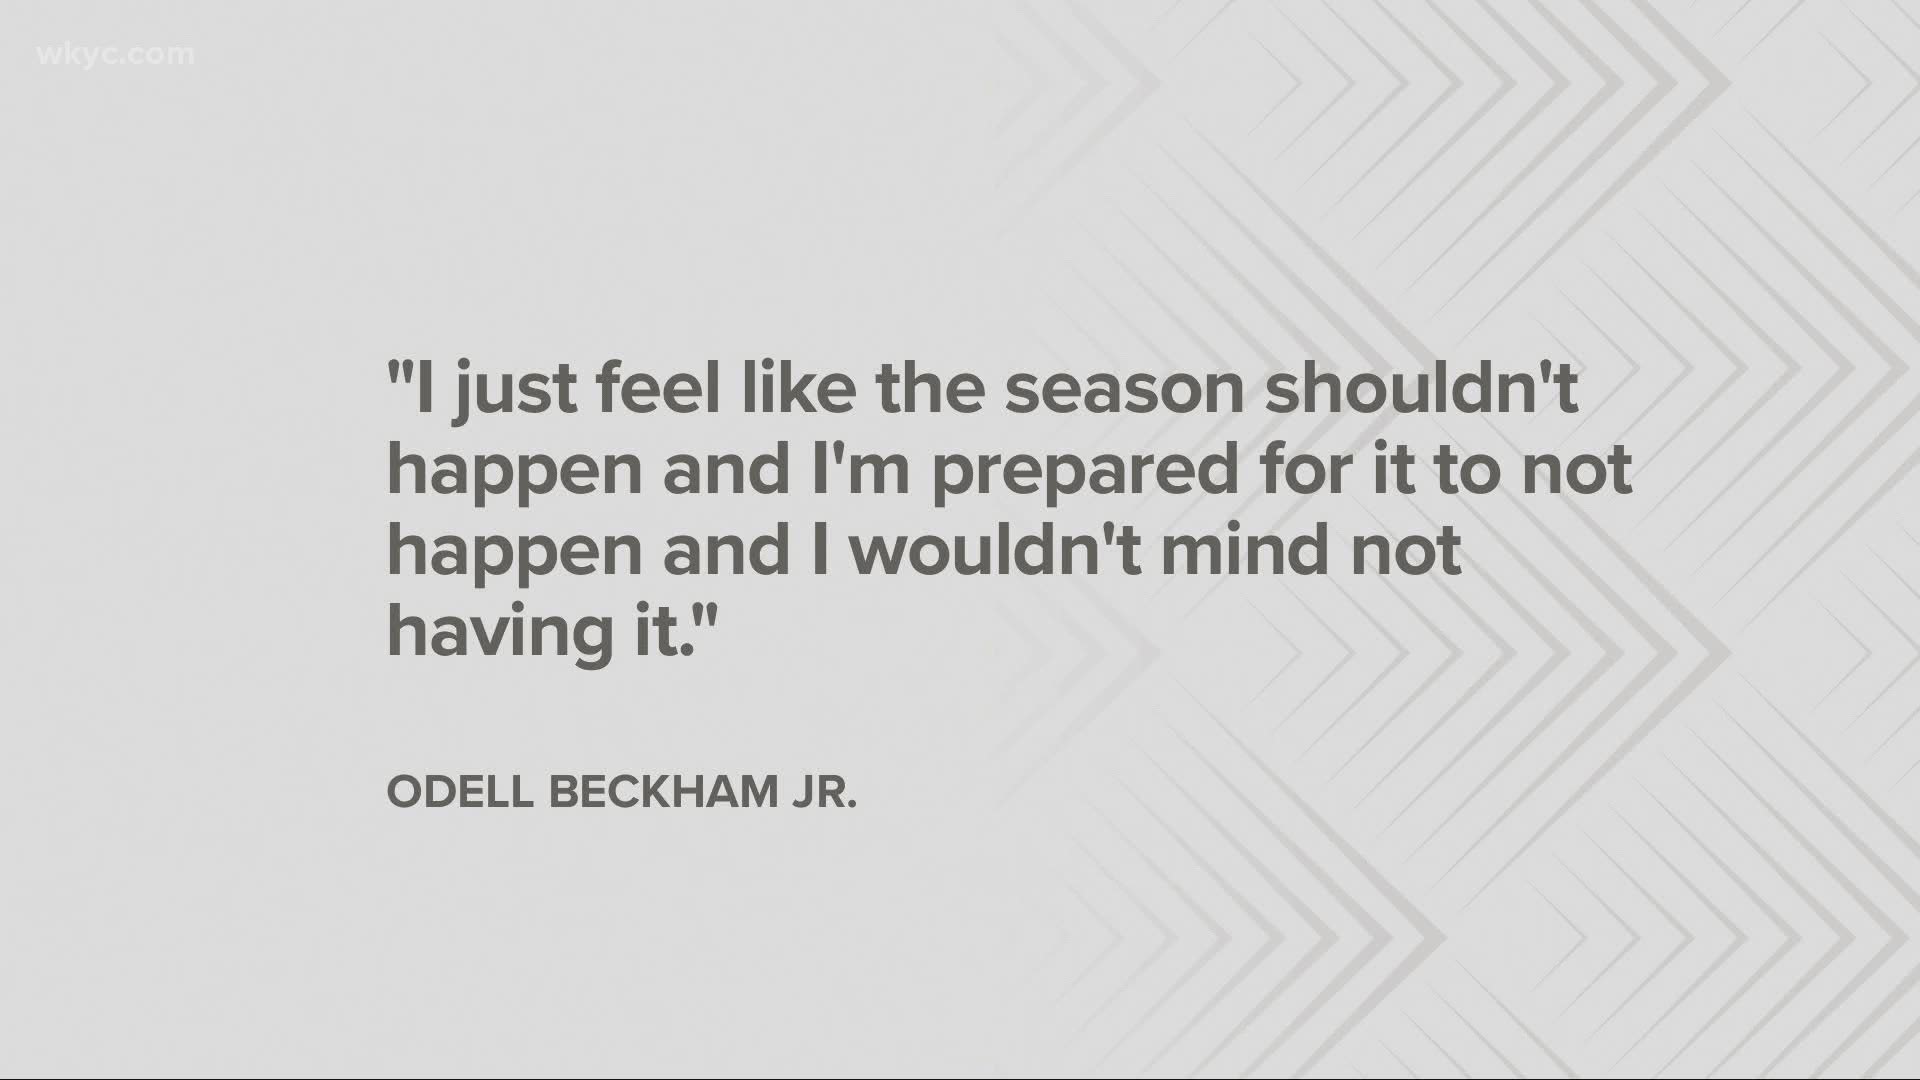 Odell Beckham Jr. plans to participate in the 2020 NFL season. But that doesn't mean that the Cleveland Browns star wide receiver doesn't have his concerns.